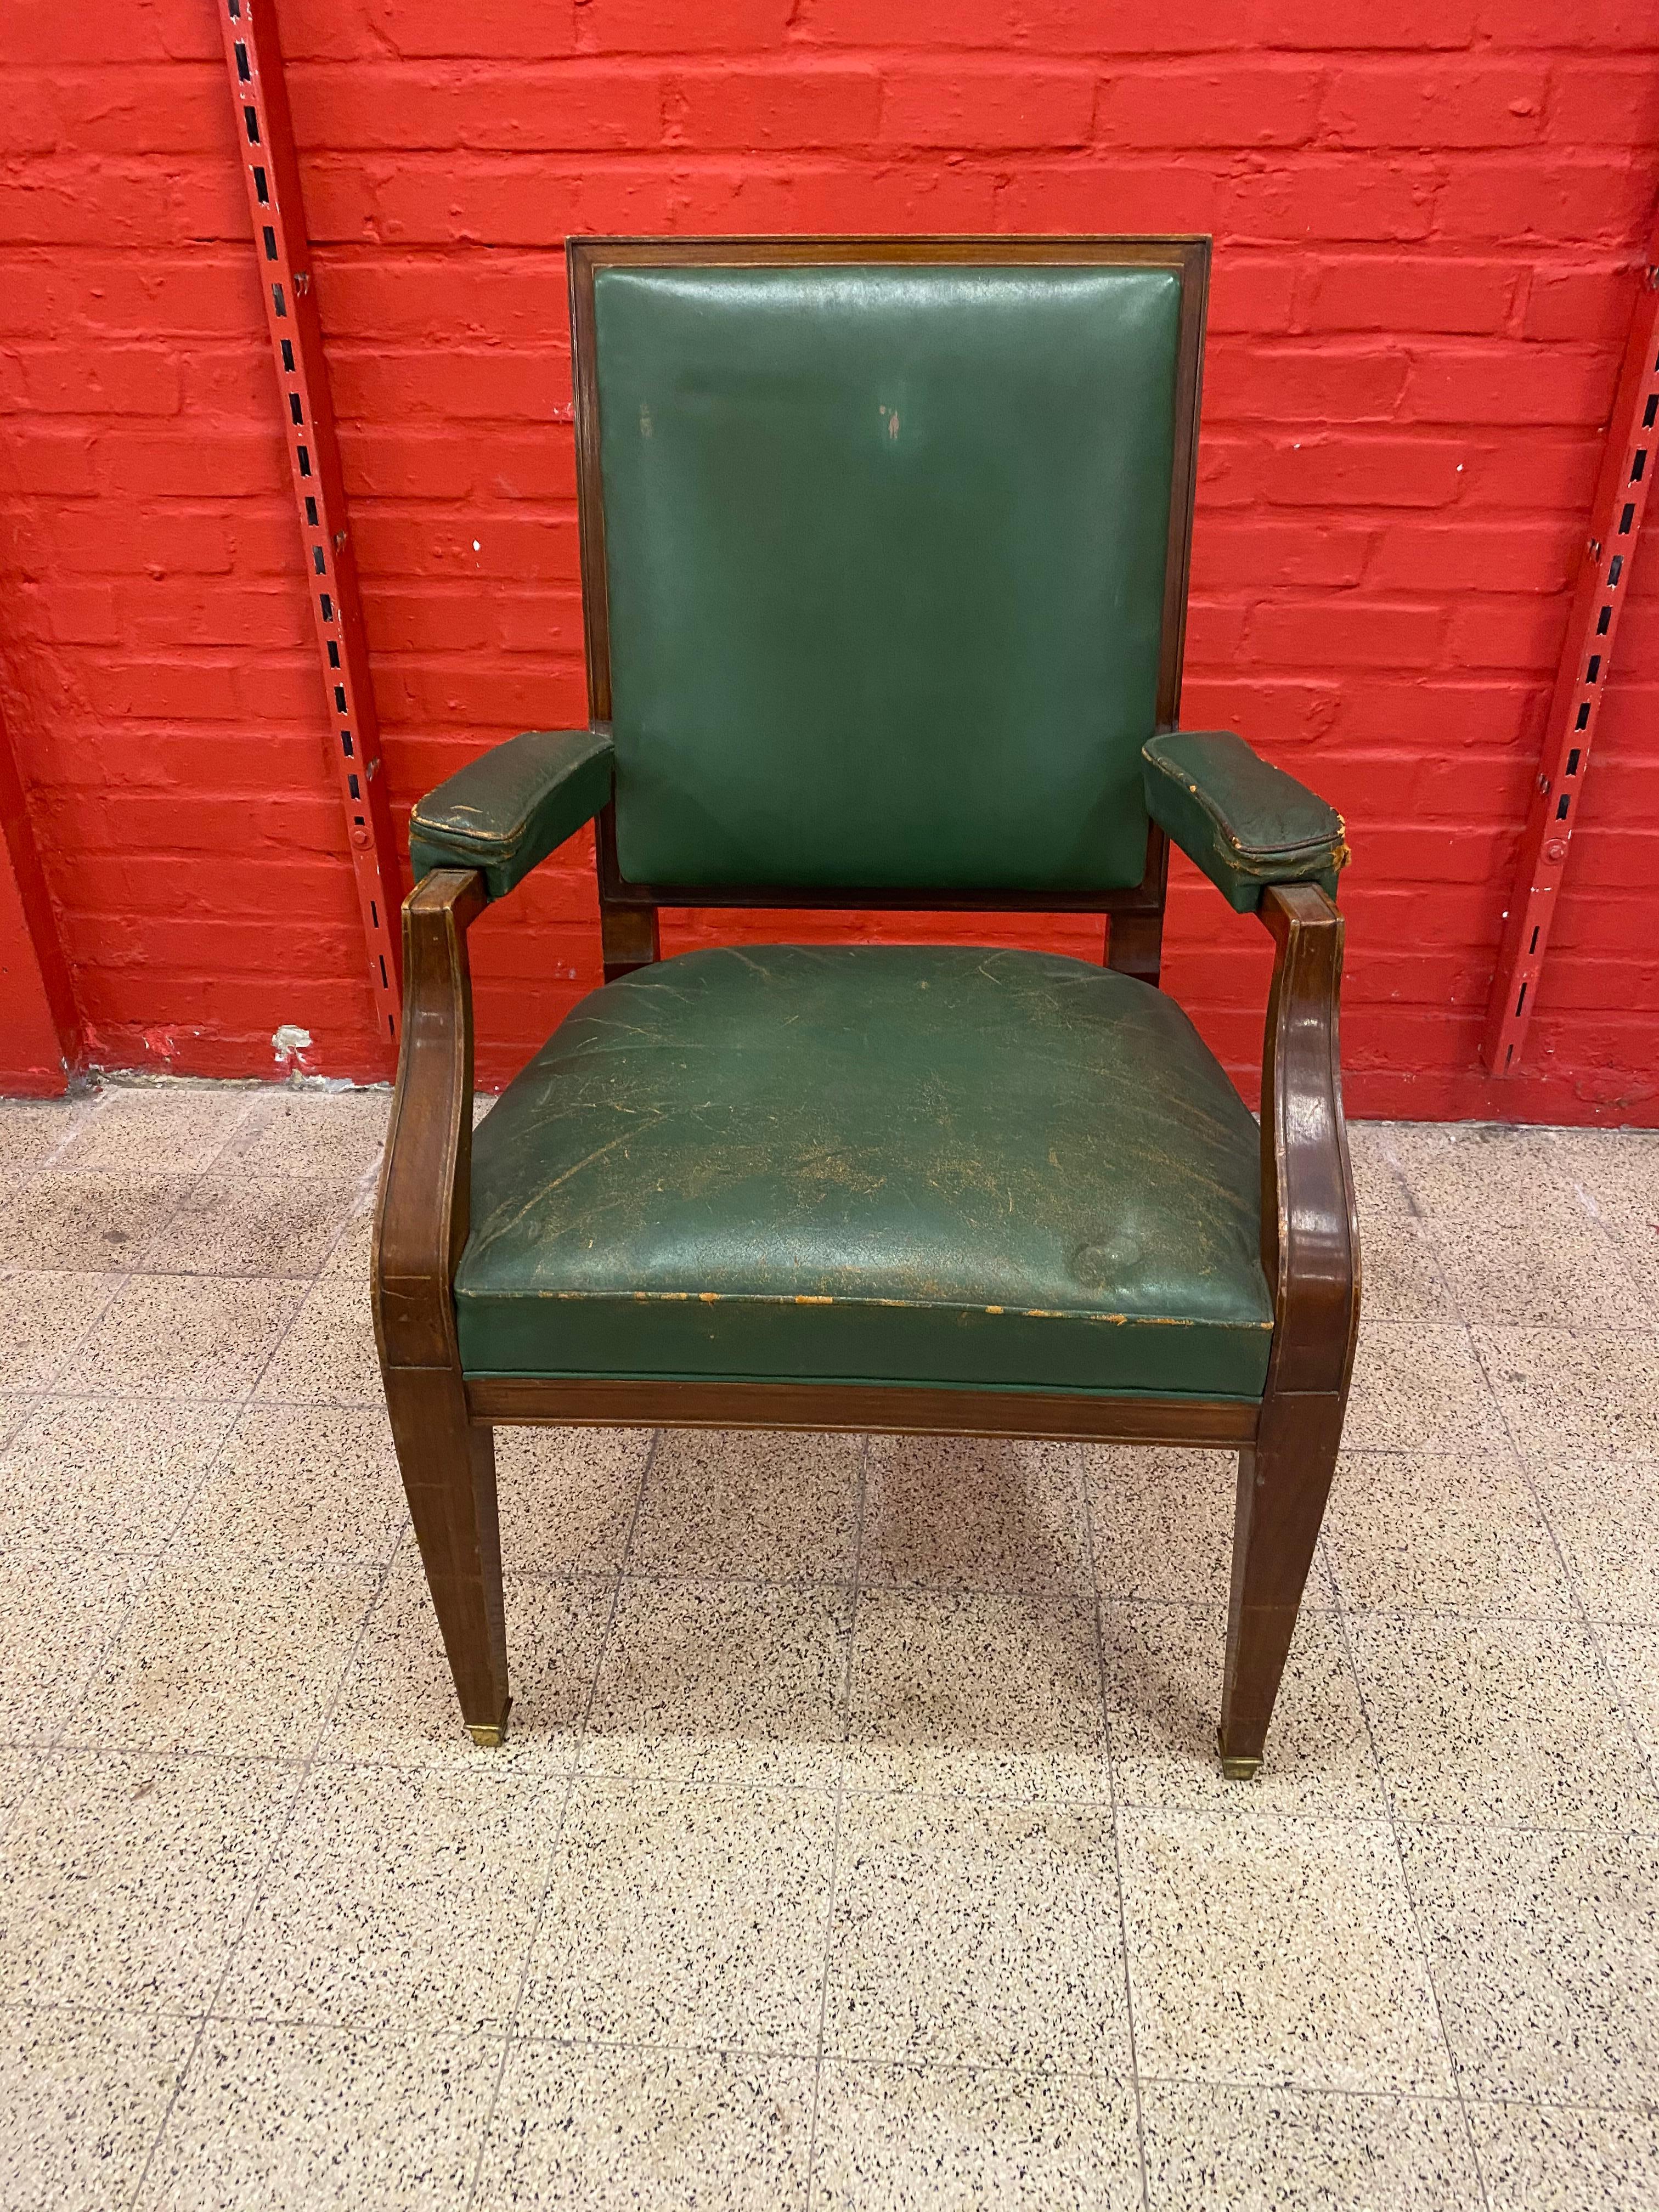 1940s French Art Deco armchair in the style of André Arbus.
walnut and leather
the leather is not holed, but it is worn.